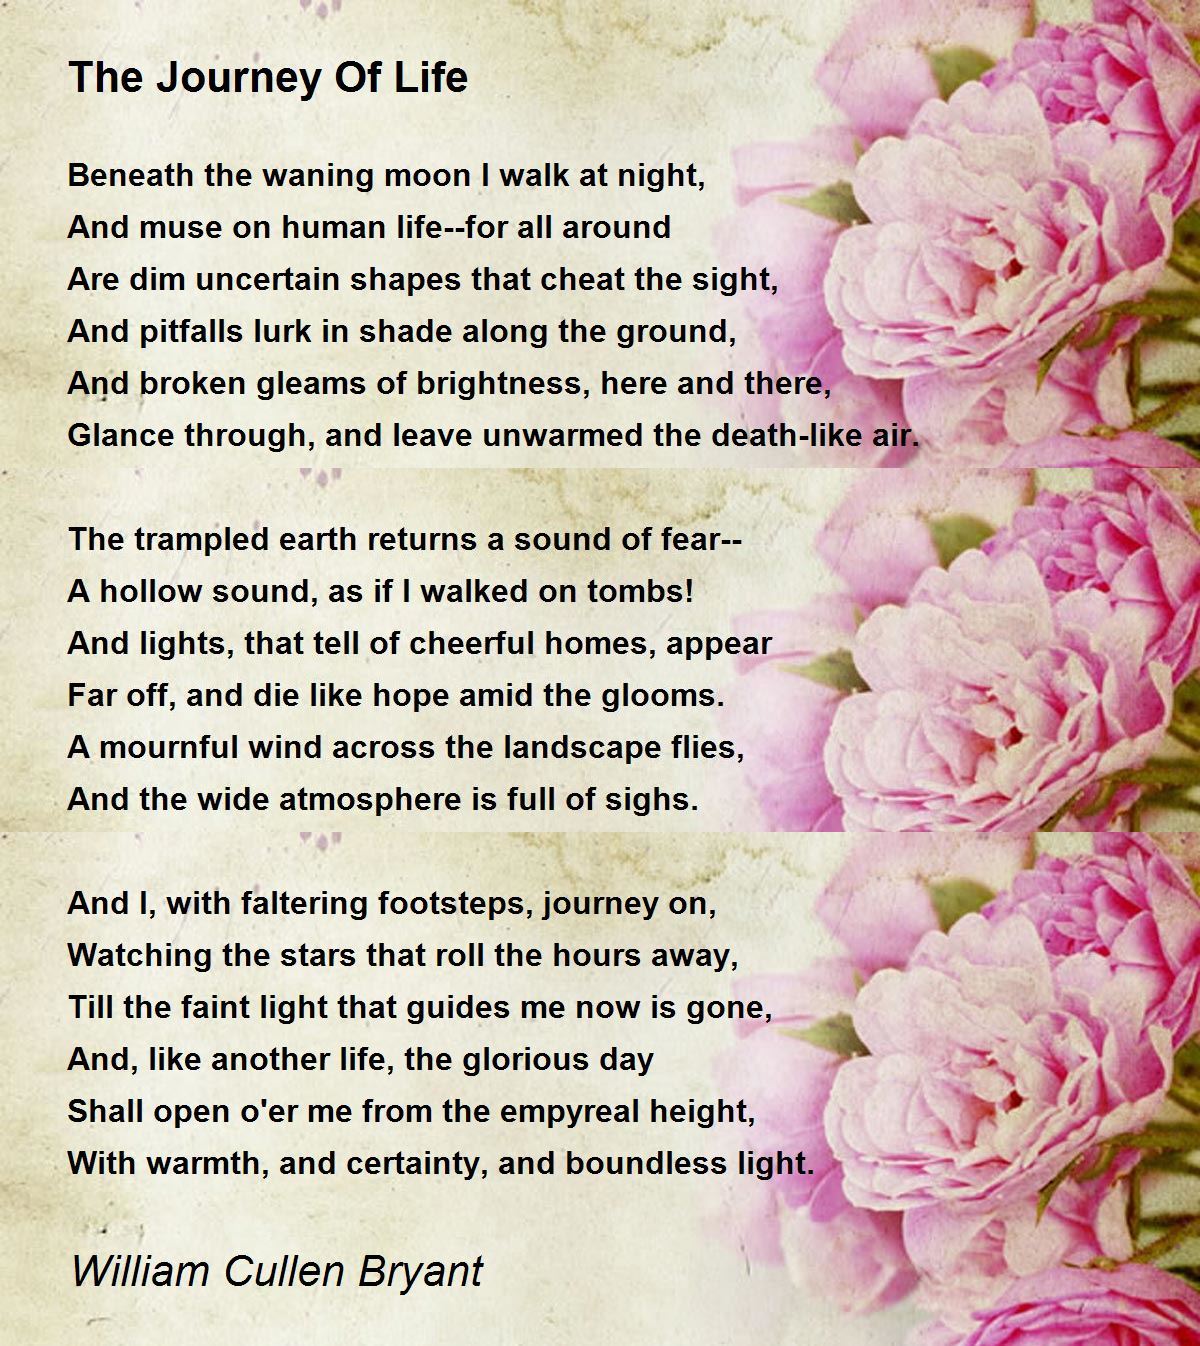 The Journey Of Life Poem by William Cullen Bryant - Poem 